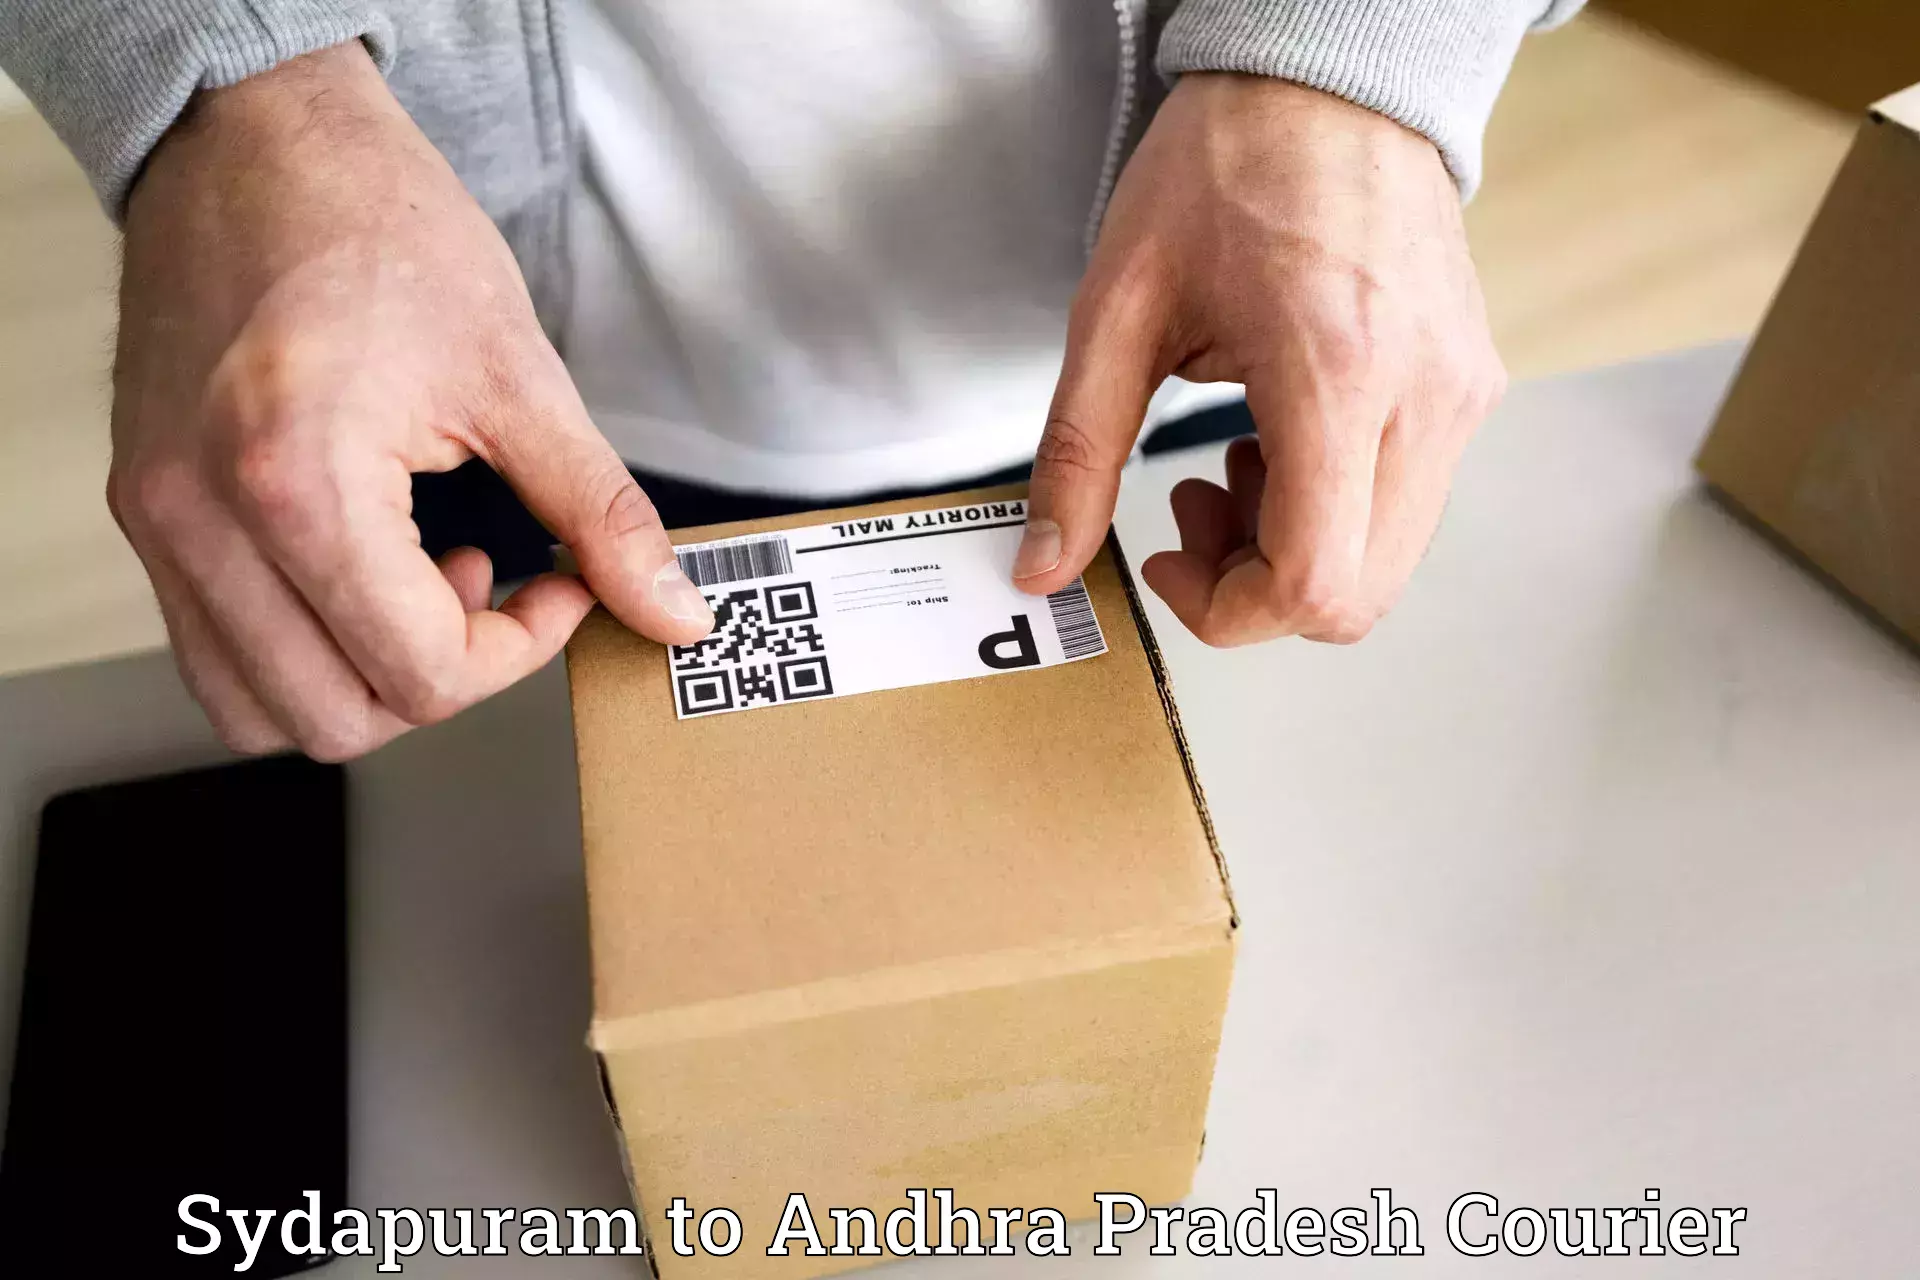 Expedited parcel delivery Sydapuram to Chittoor